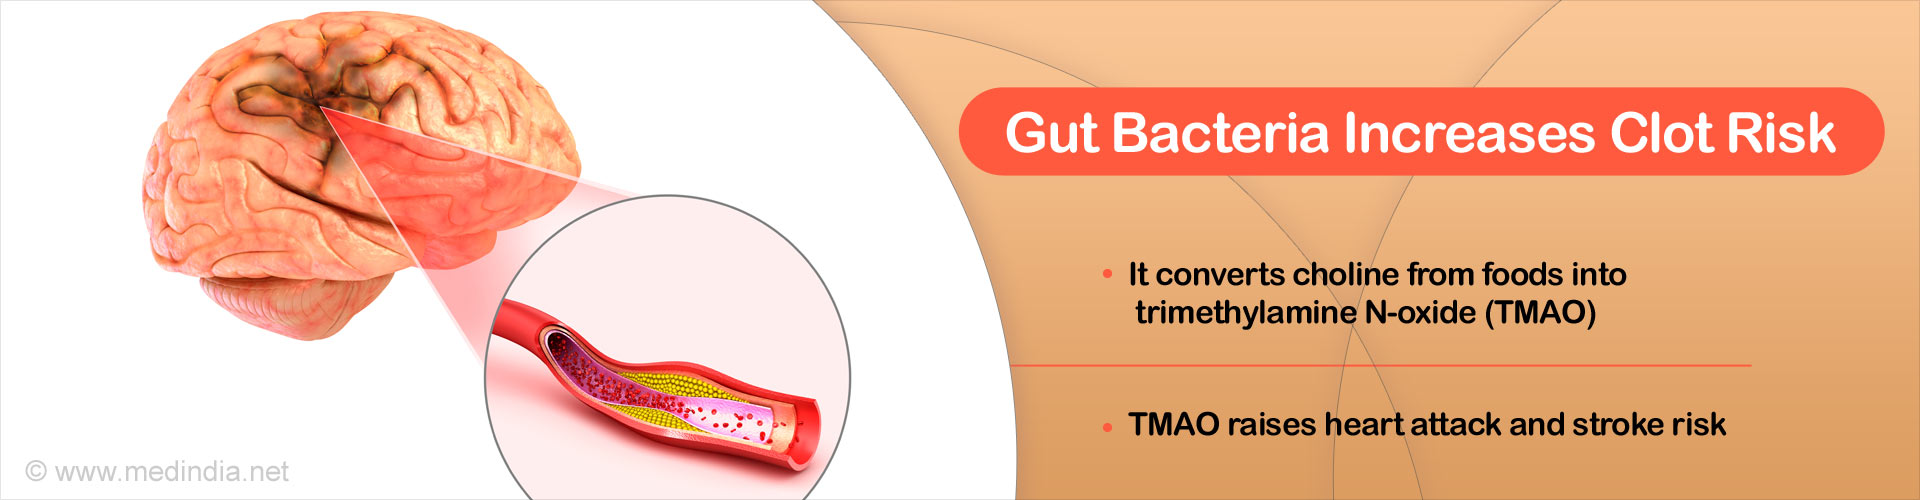 Gut bacteria increase clot risk
- It converts choline from foods into trimethylamine N-oxide (TMAO)
- TMAO raises heart attack and stroke risk